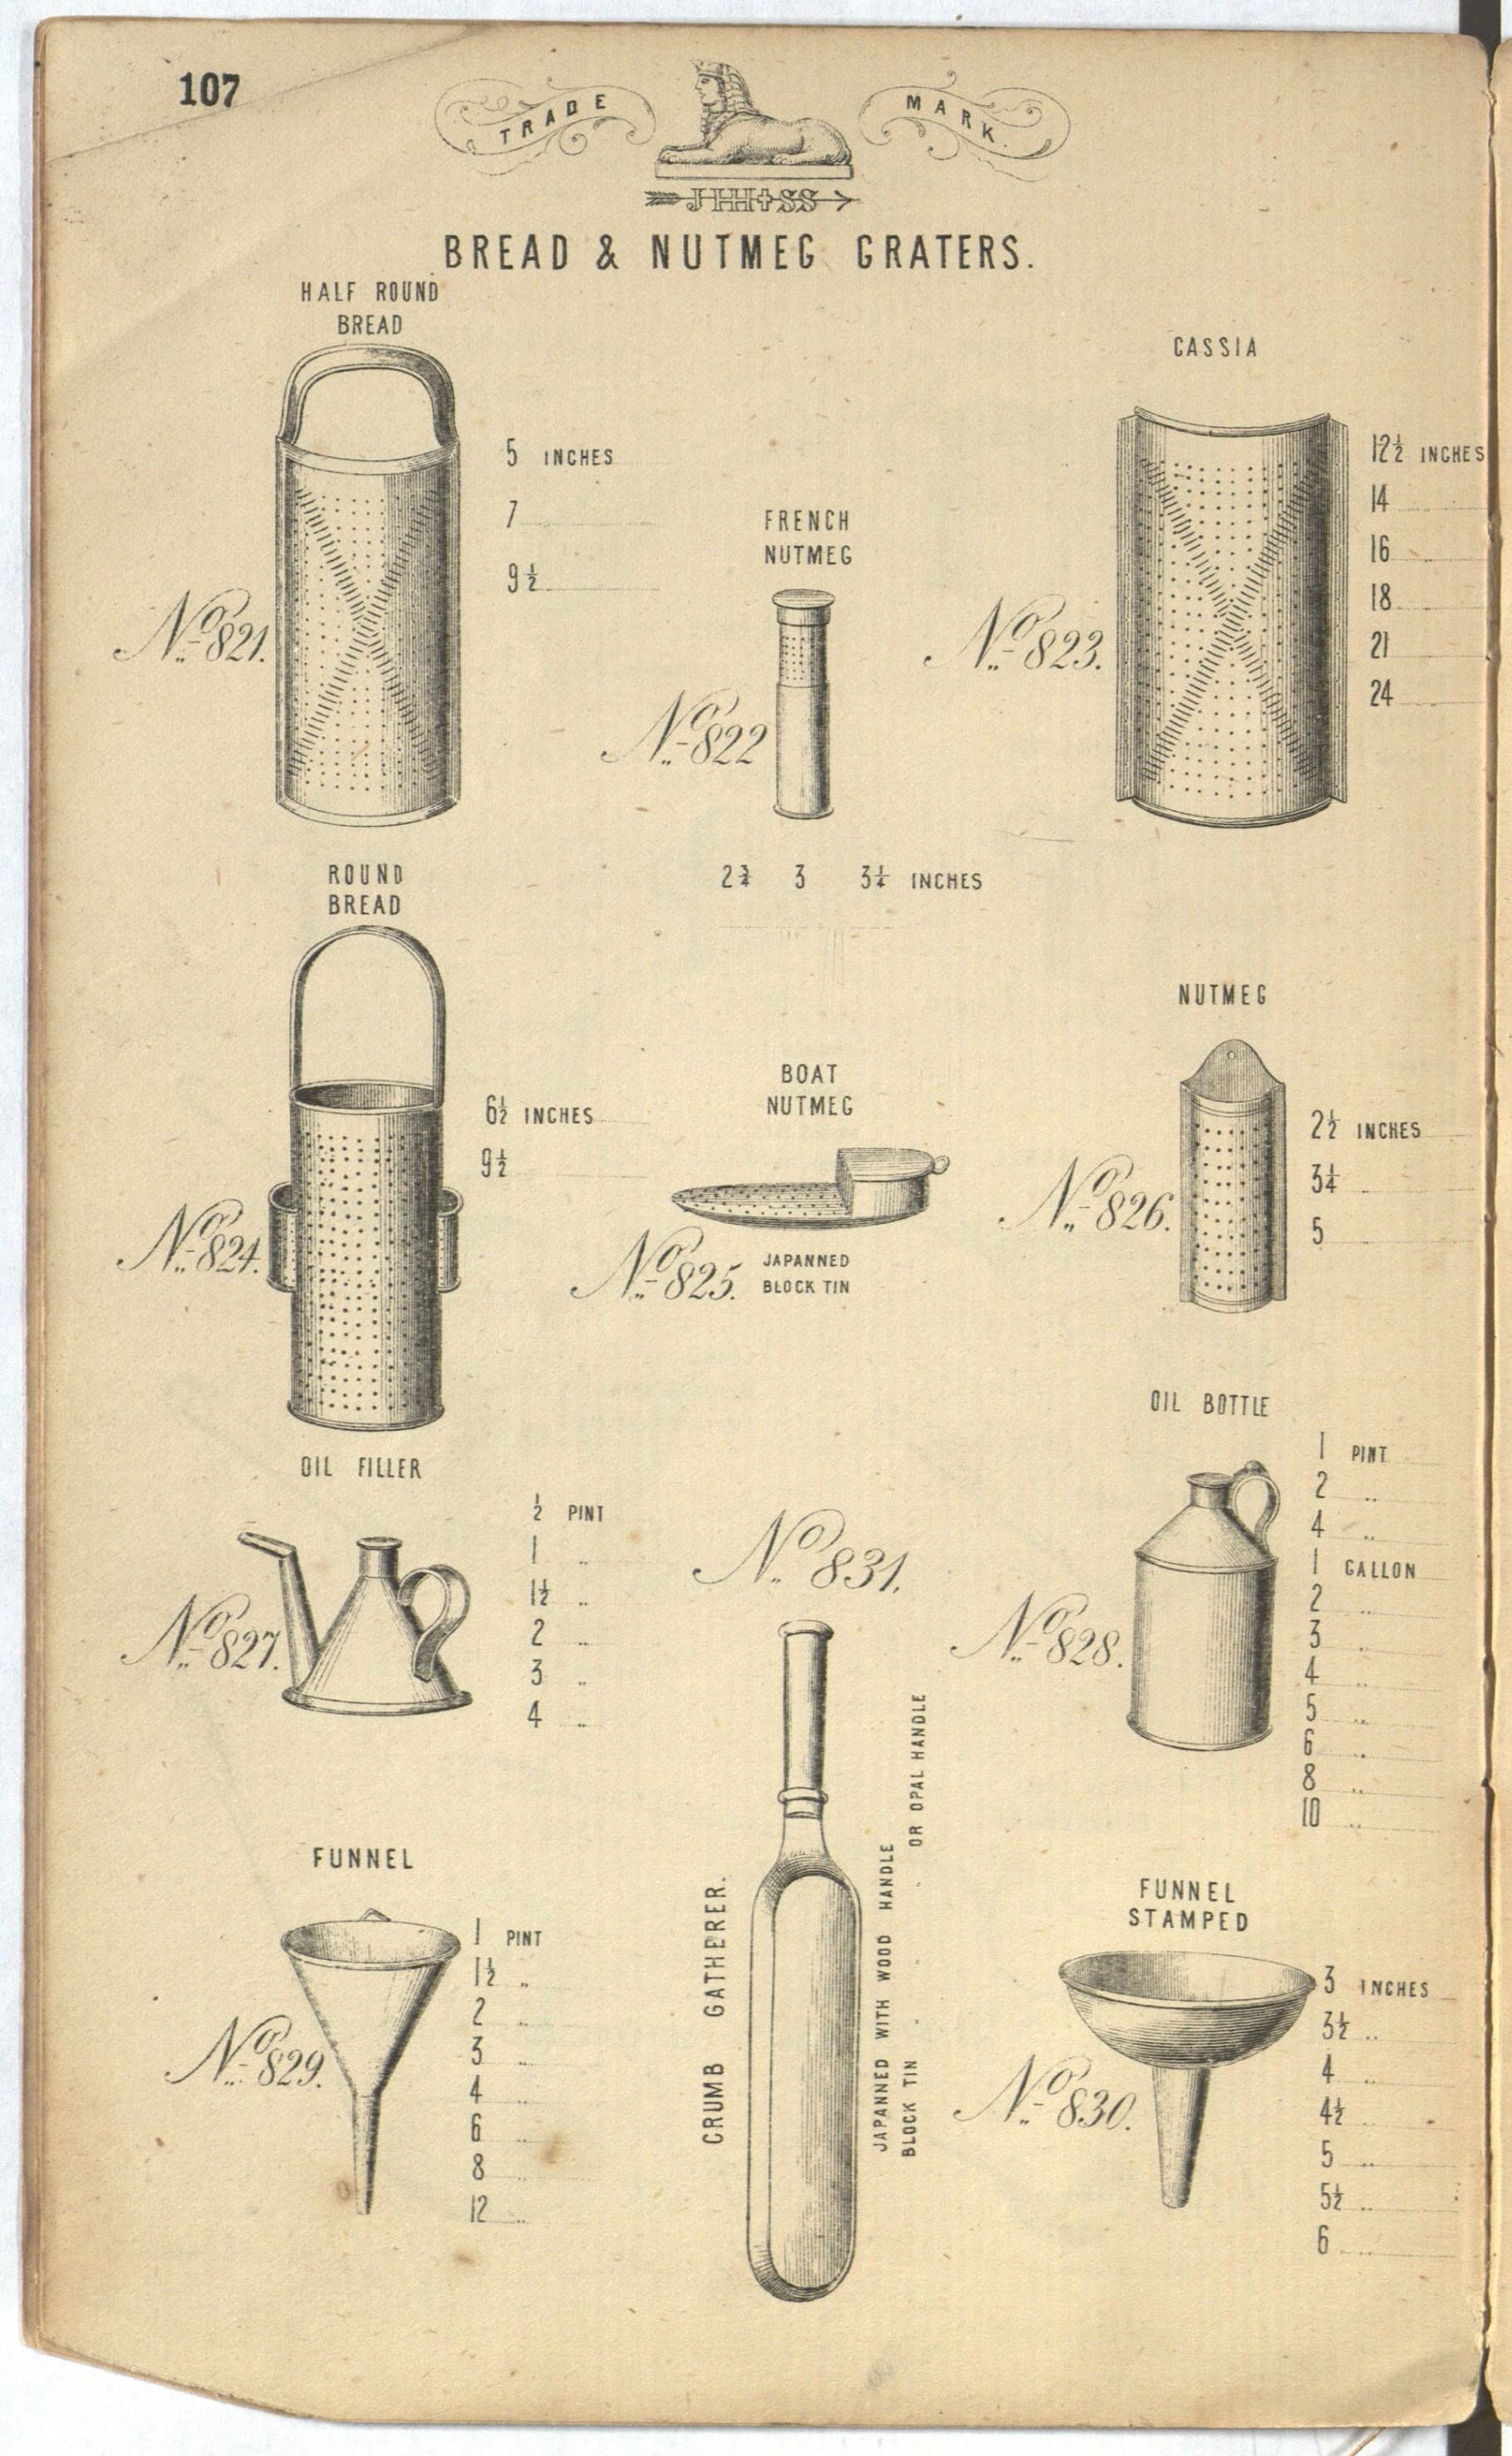 Page from book showing twelve different tinware grater shapes.